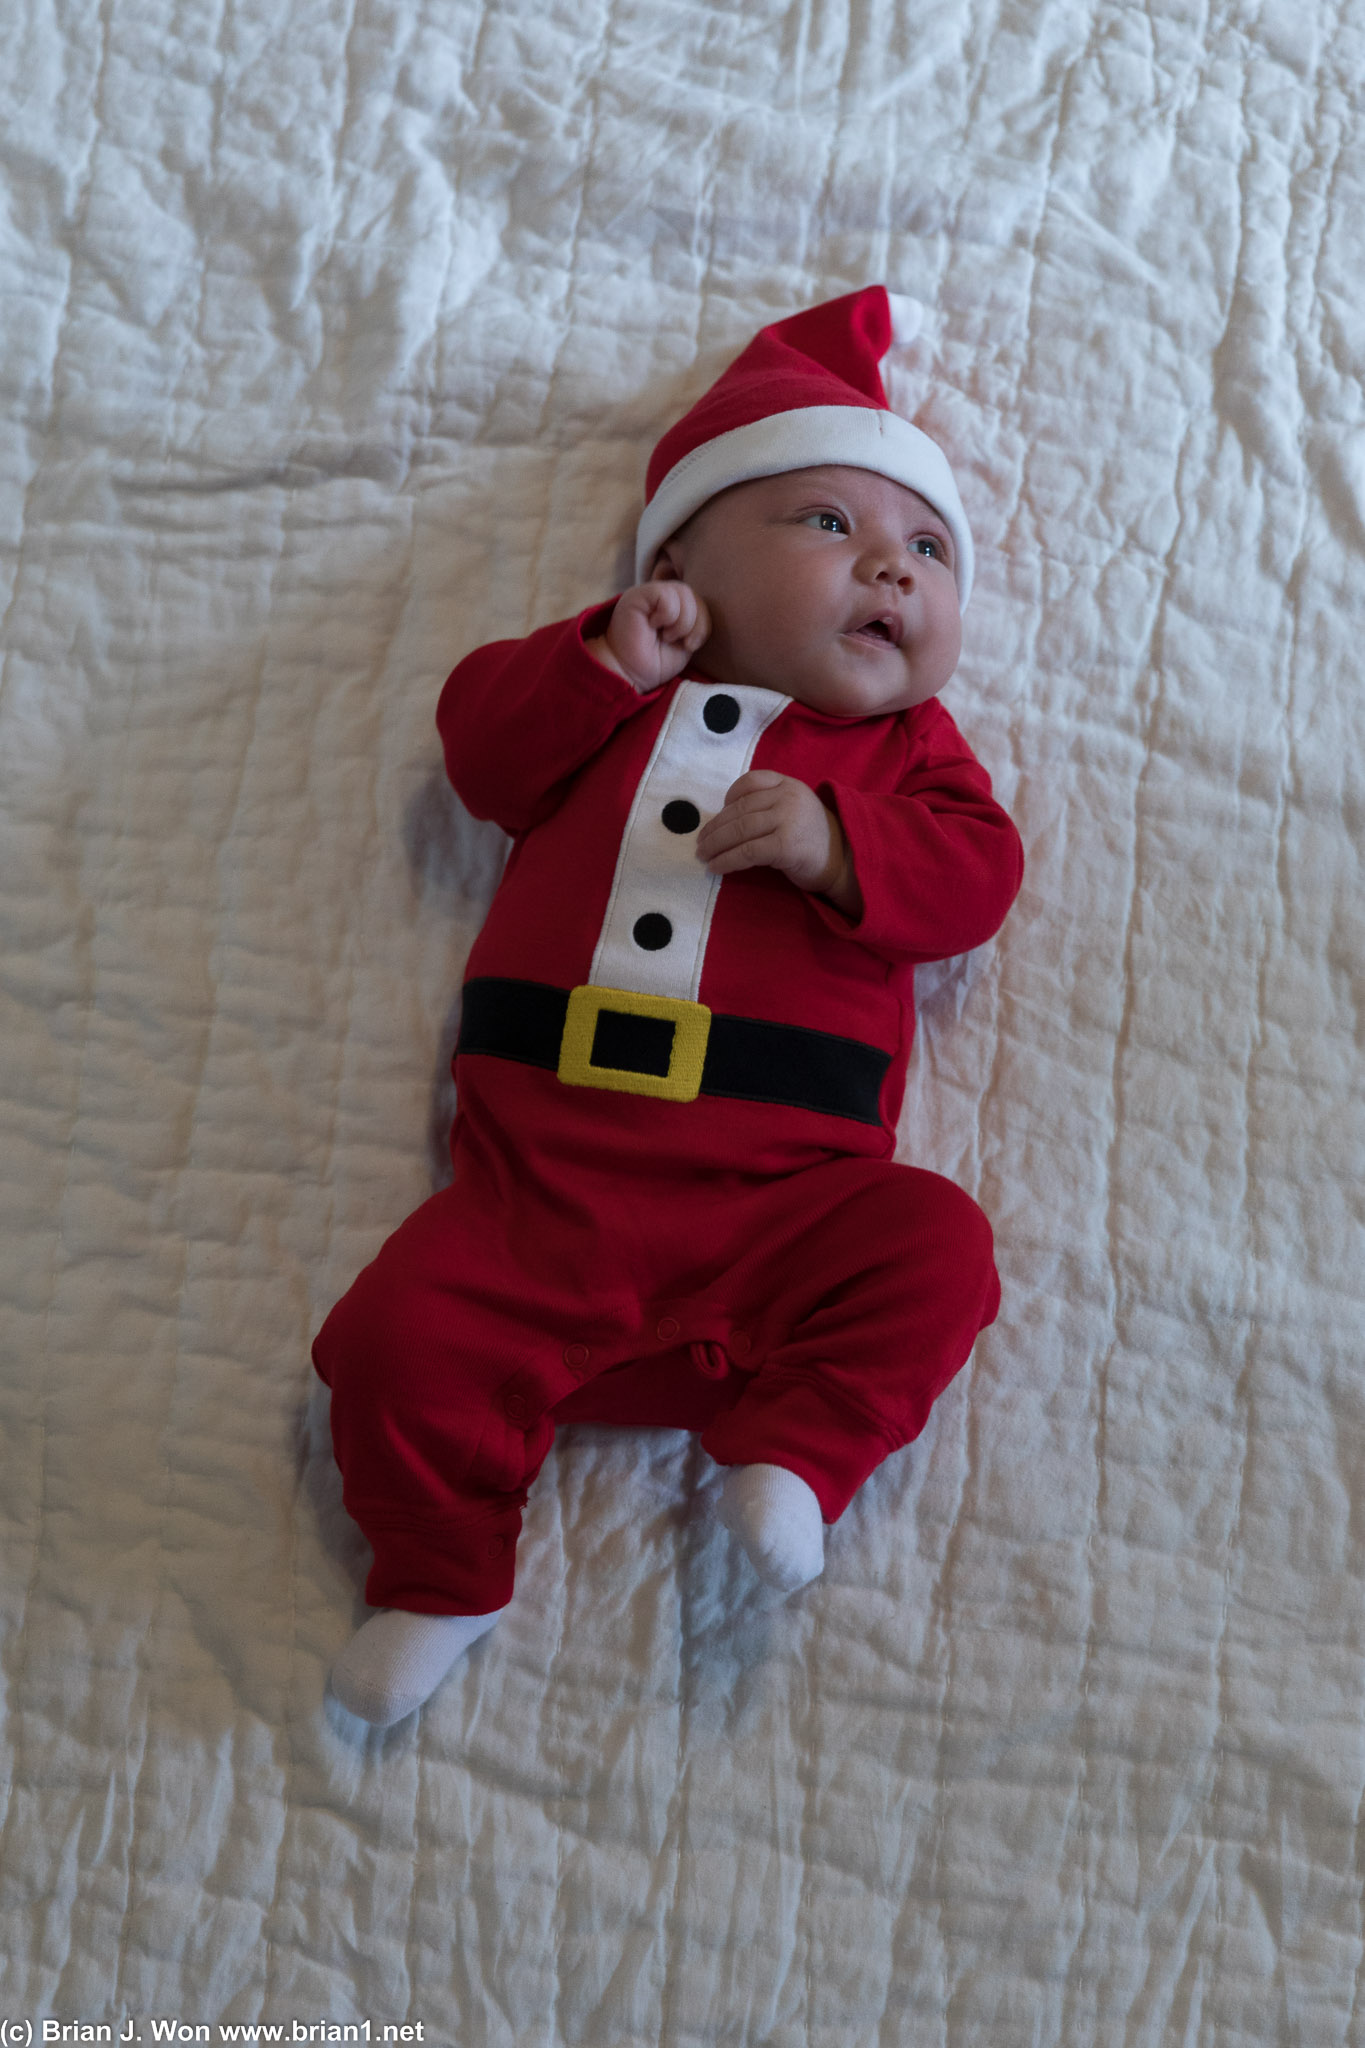 Baby Colette in her Christmas outfit.